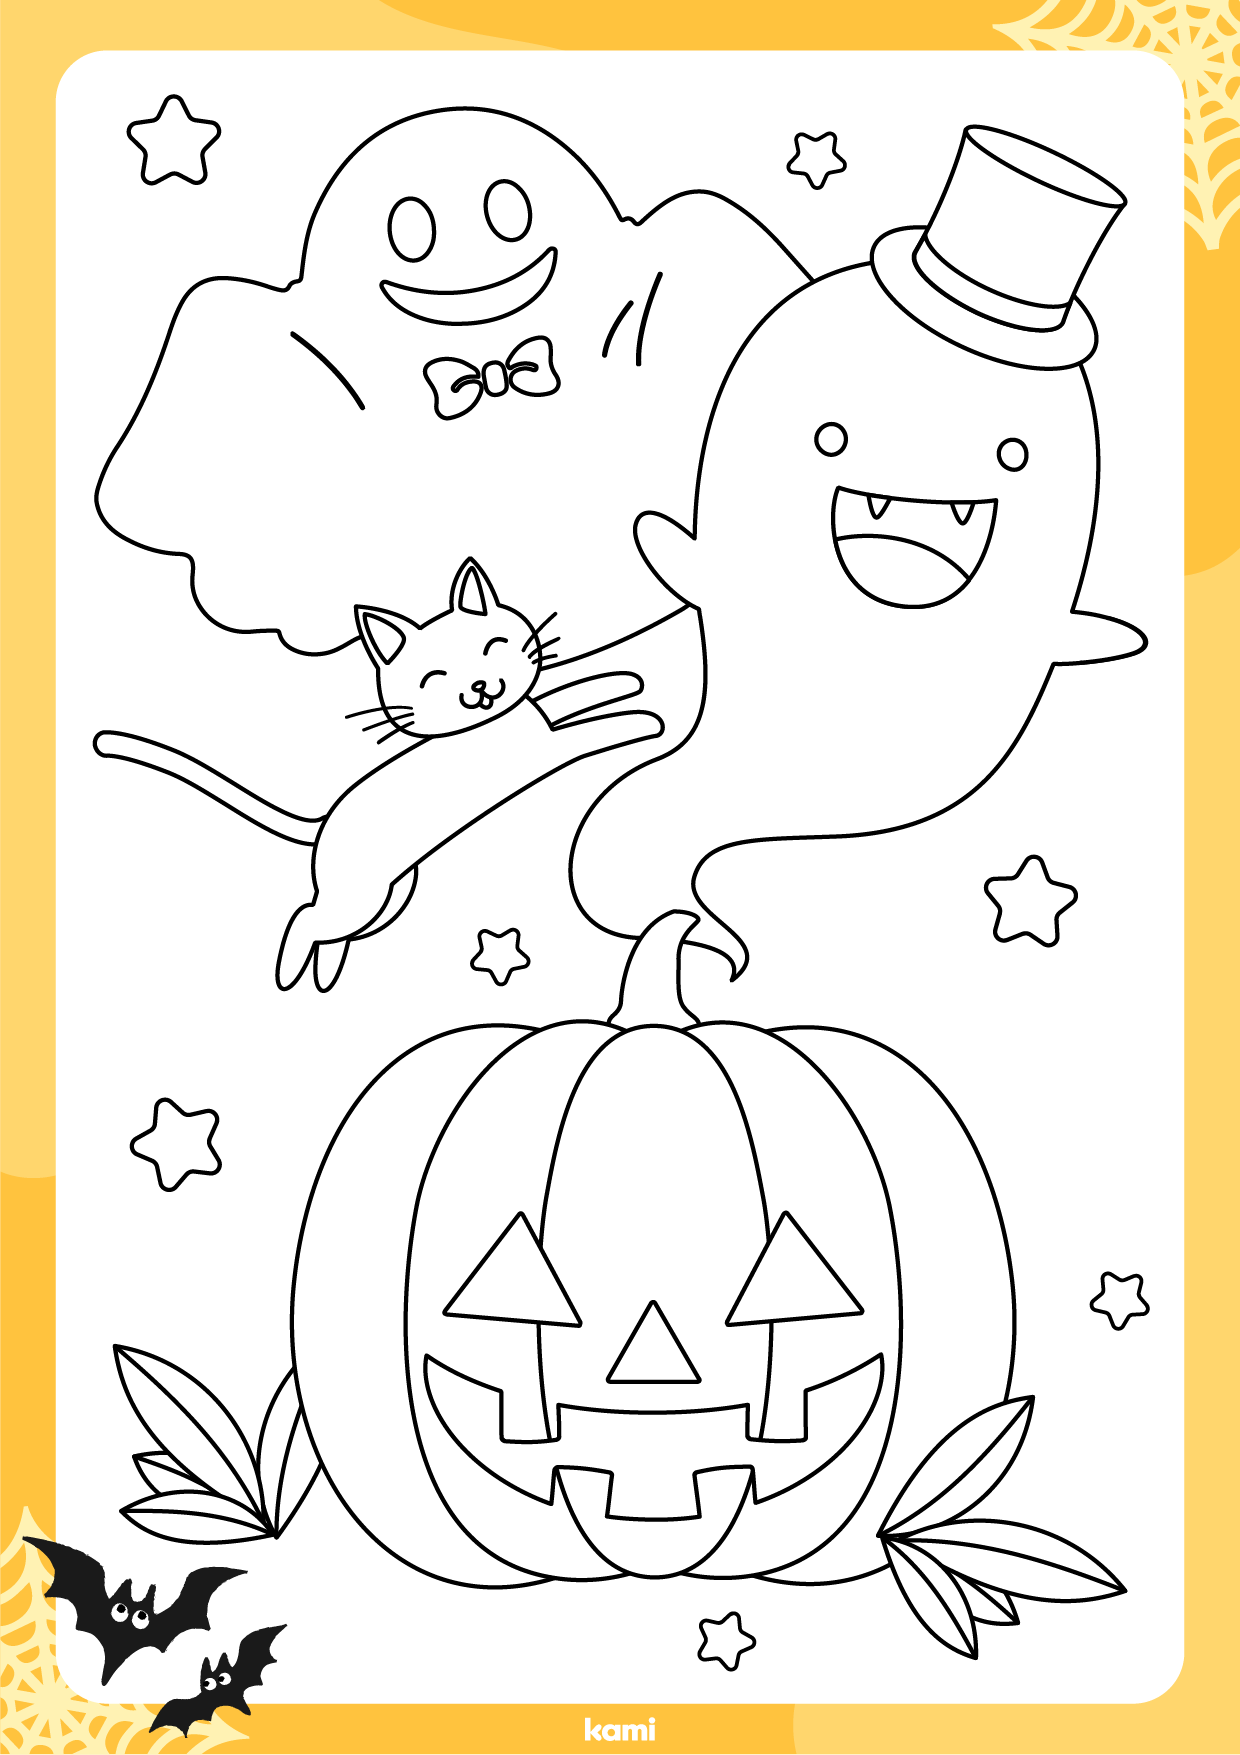 Halloween coloring sheet ghosts for teachers perfect for grades st nd rd th th k pre k other classroom resources kami library